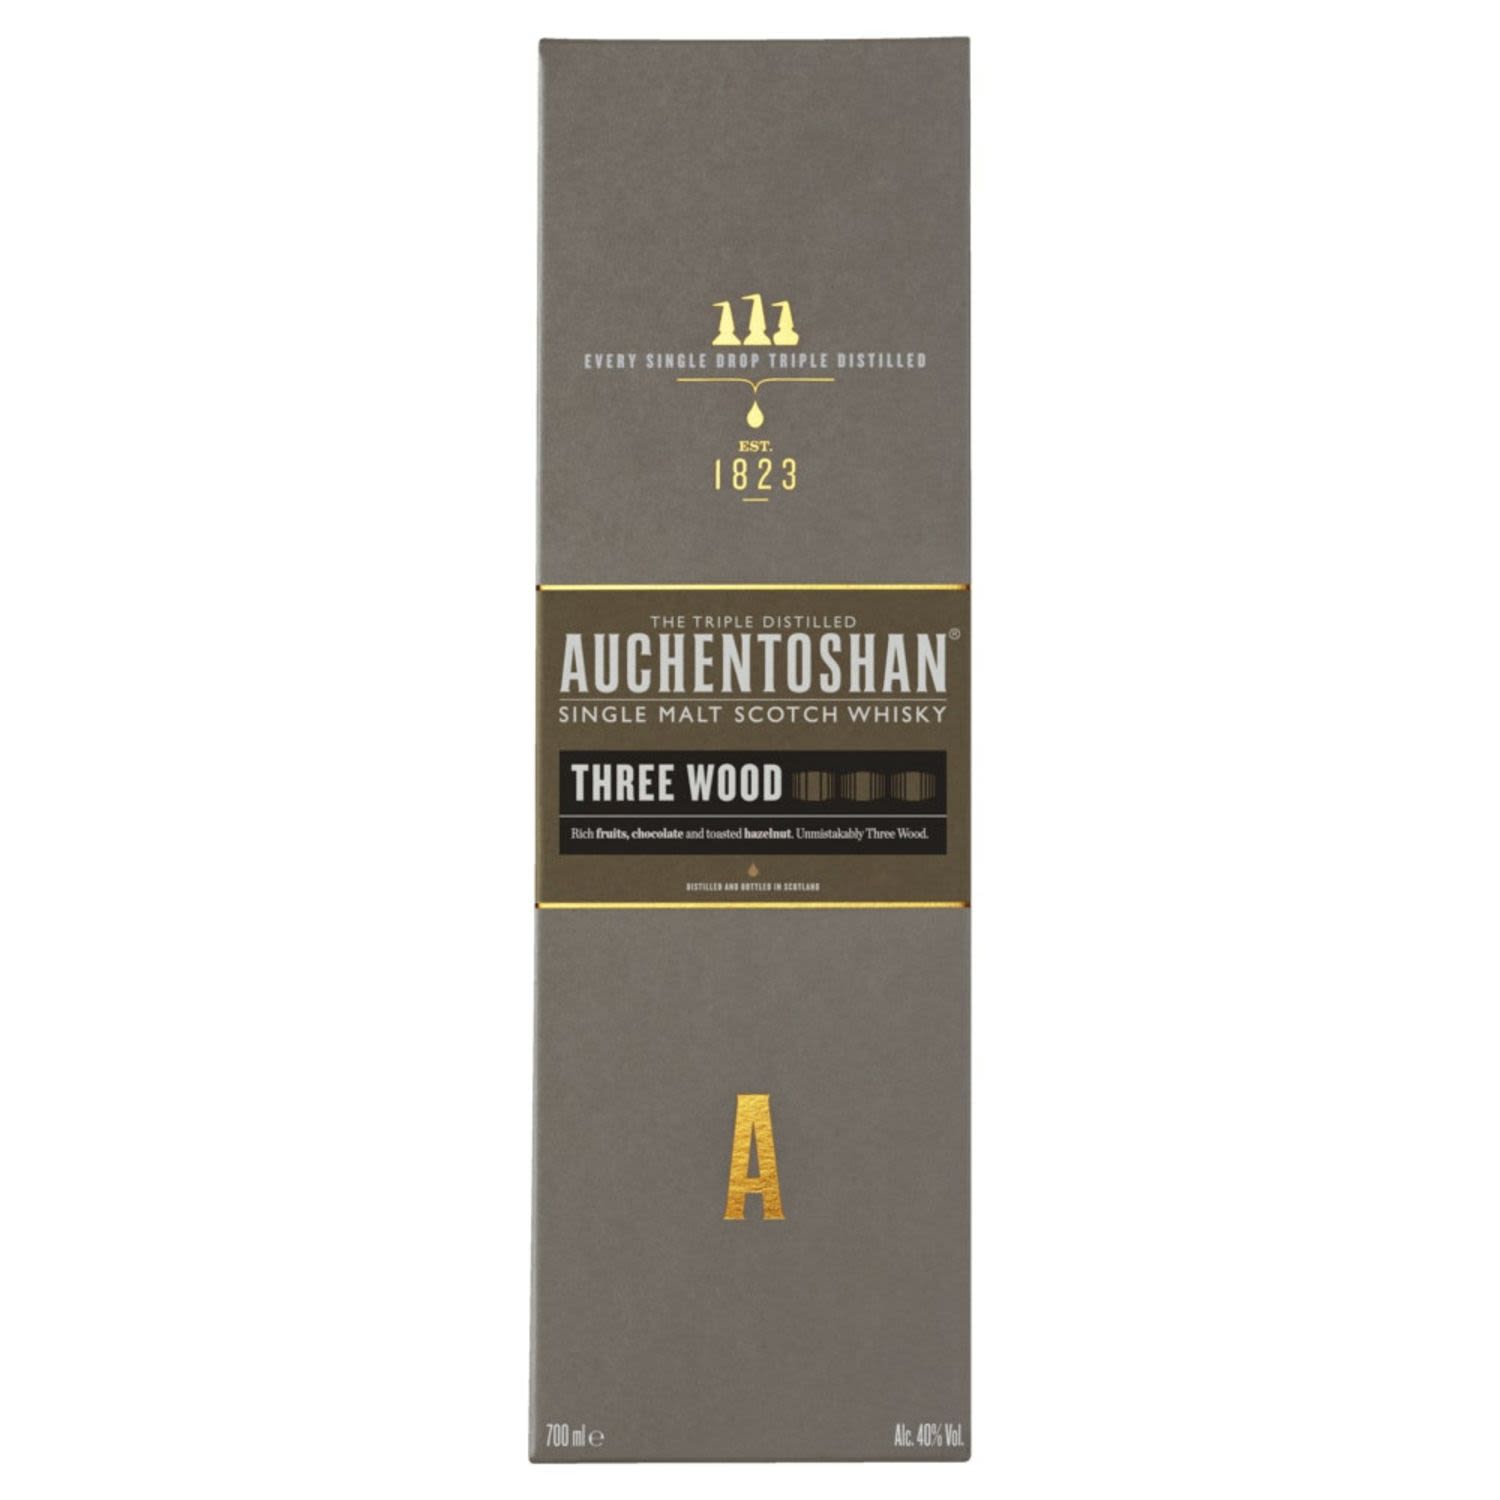 AUCHENTOSHAN Three Wood is rich with dark fruits, thick butterscotch, roasted hazelnuts and the signature smooth and delicate Auchentoshan taste.<br /> <br />Alcohol Volume: 43.00%<br /><br />Pack Format: Bottle<br /><br />Standard Drinks: 23.8</br /><br />Pack Type: Bottle<br /><br />Country of Origin: Scotland<br />